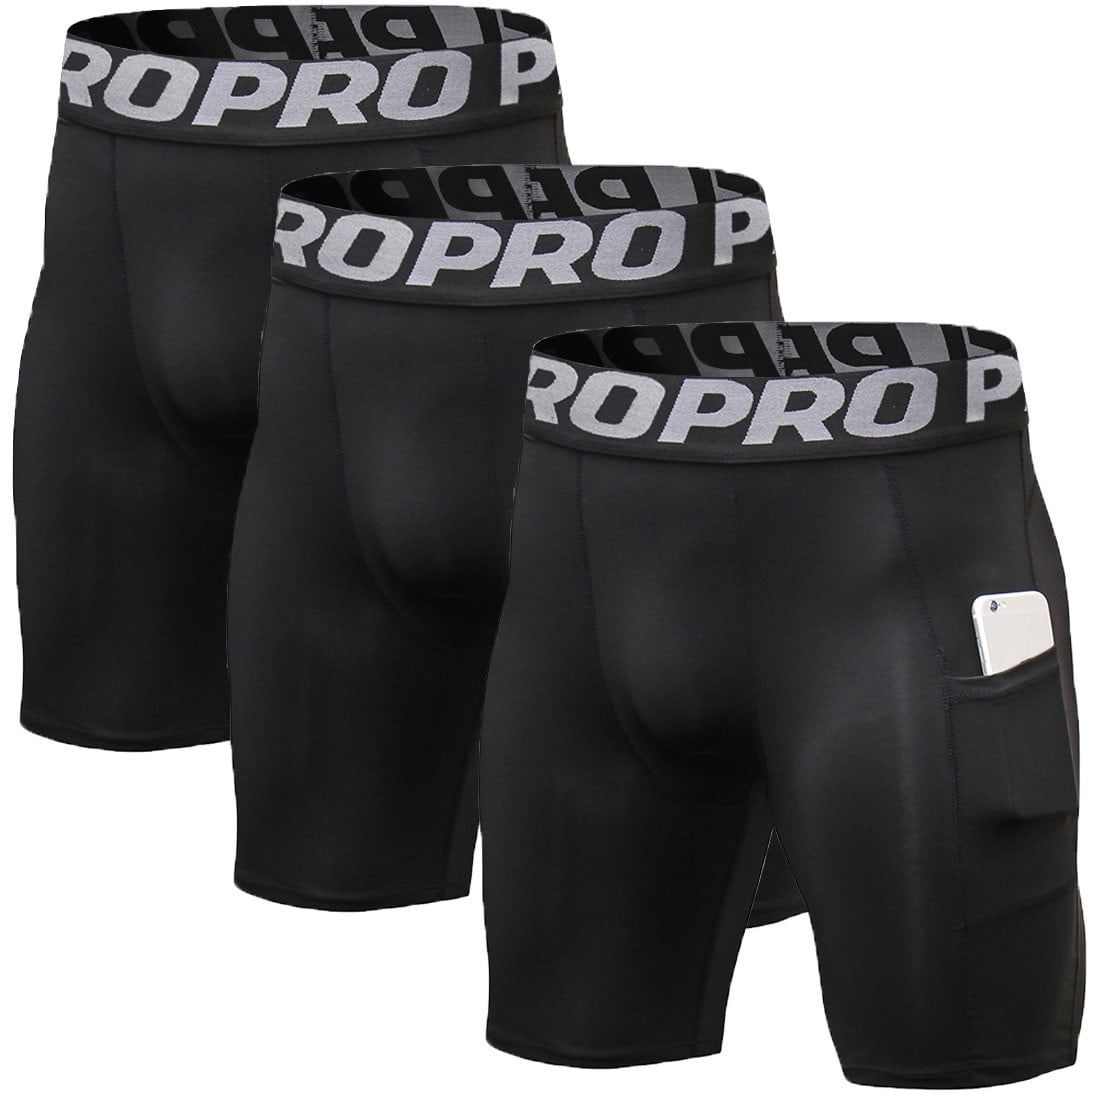 Helo Anti-Chafing Compression Board Shorts Swimwear Underwear NEW STOCK AND SIZE 